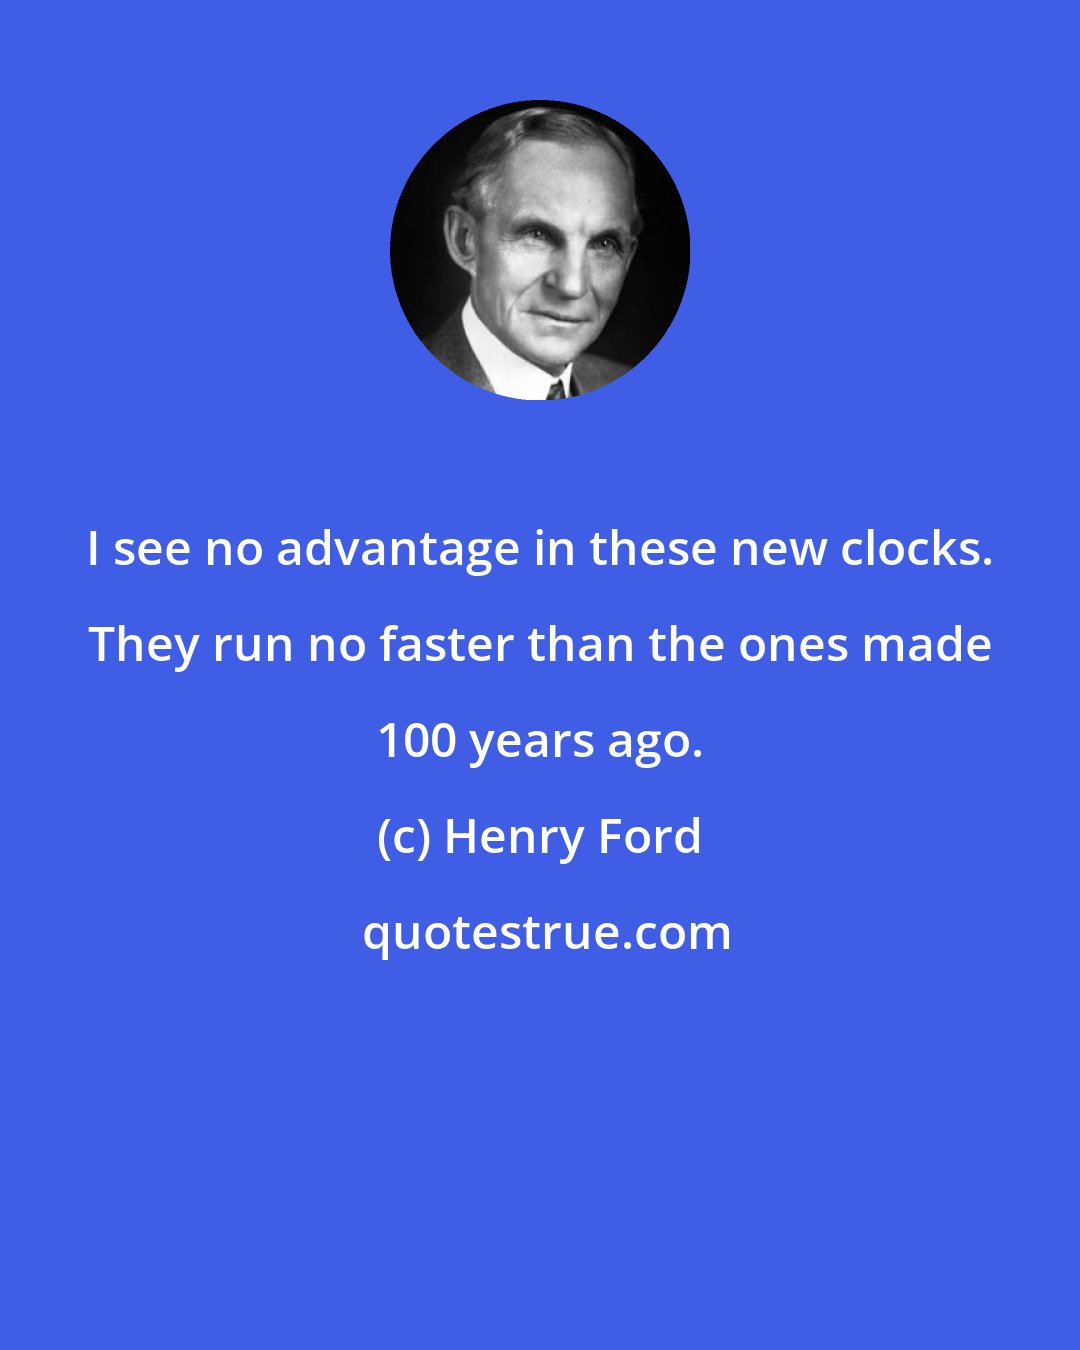 Henry Ford: I see no advantage in these new clocks. They run no faster than the ones made 100 years ago.